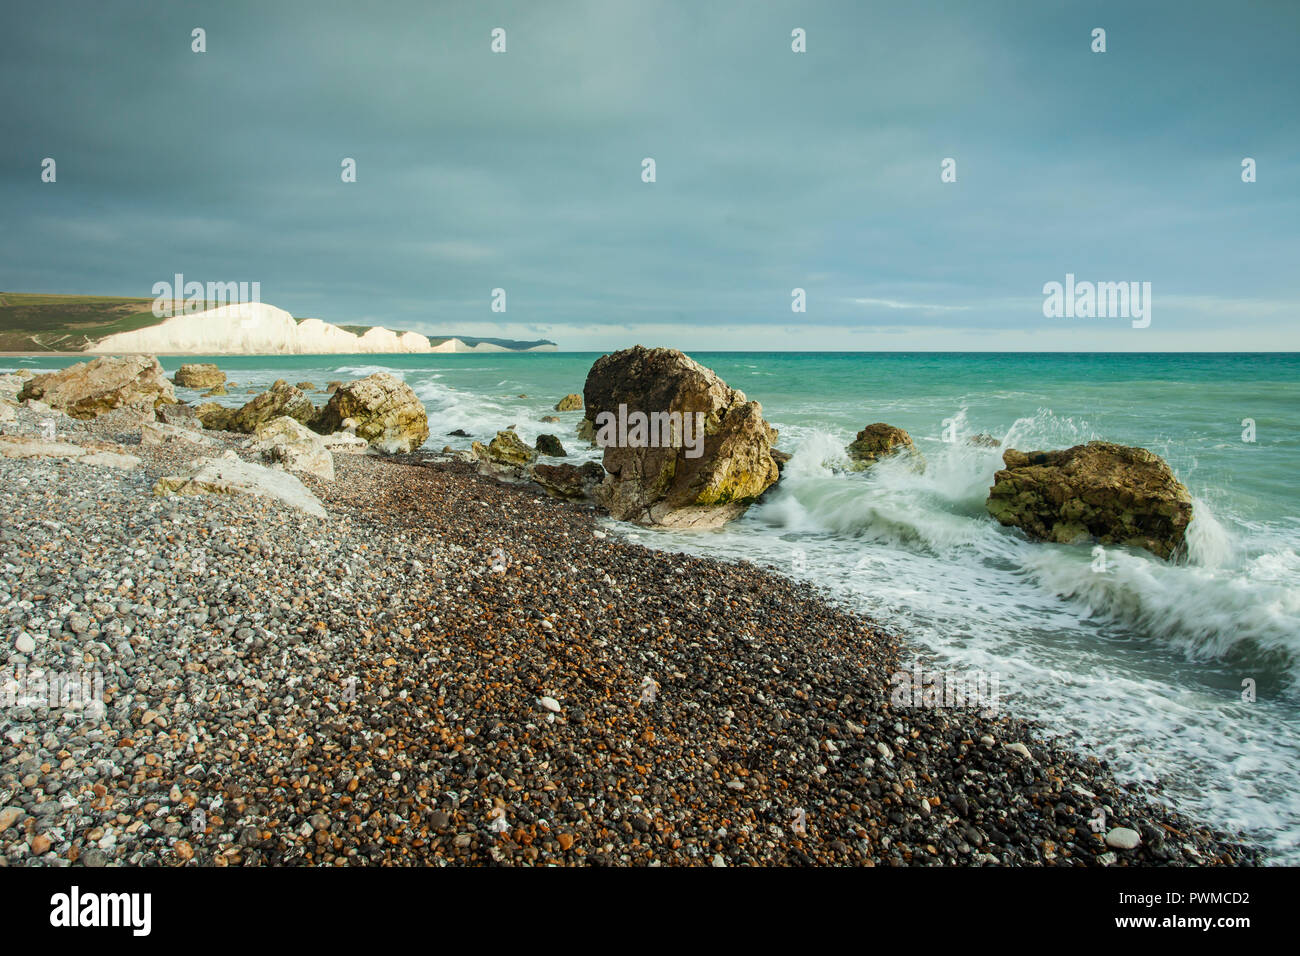 Afternoon at the cliffs of Seven Sisters on the coast of East Sussex, England. Stock Photo